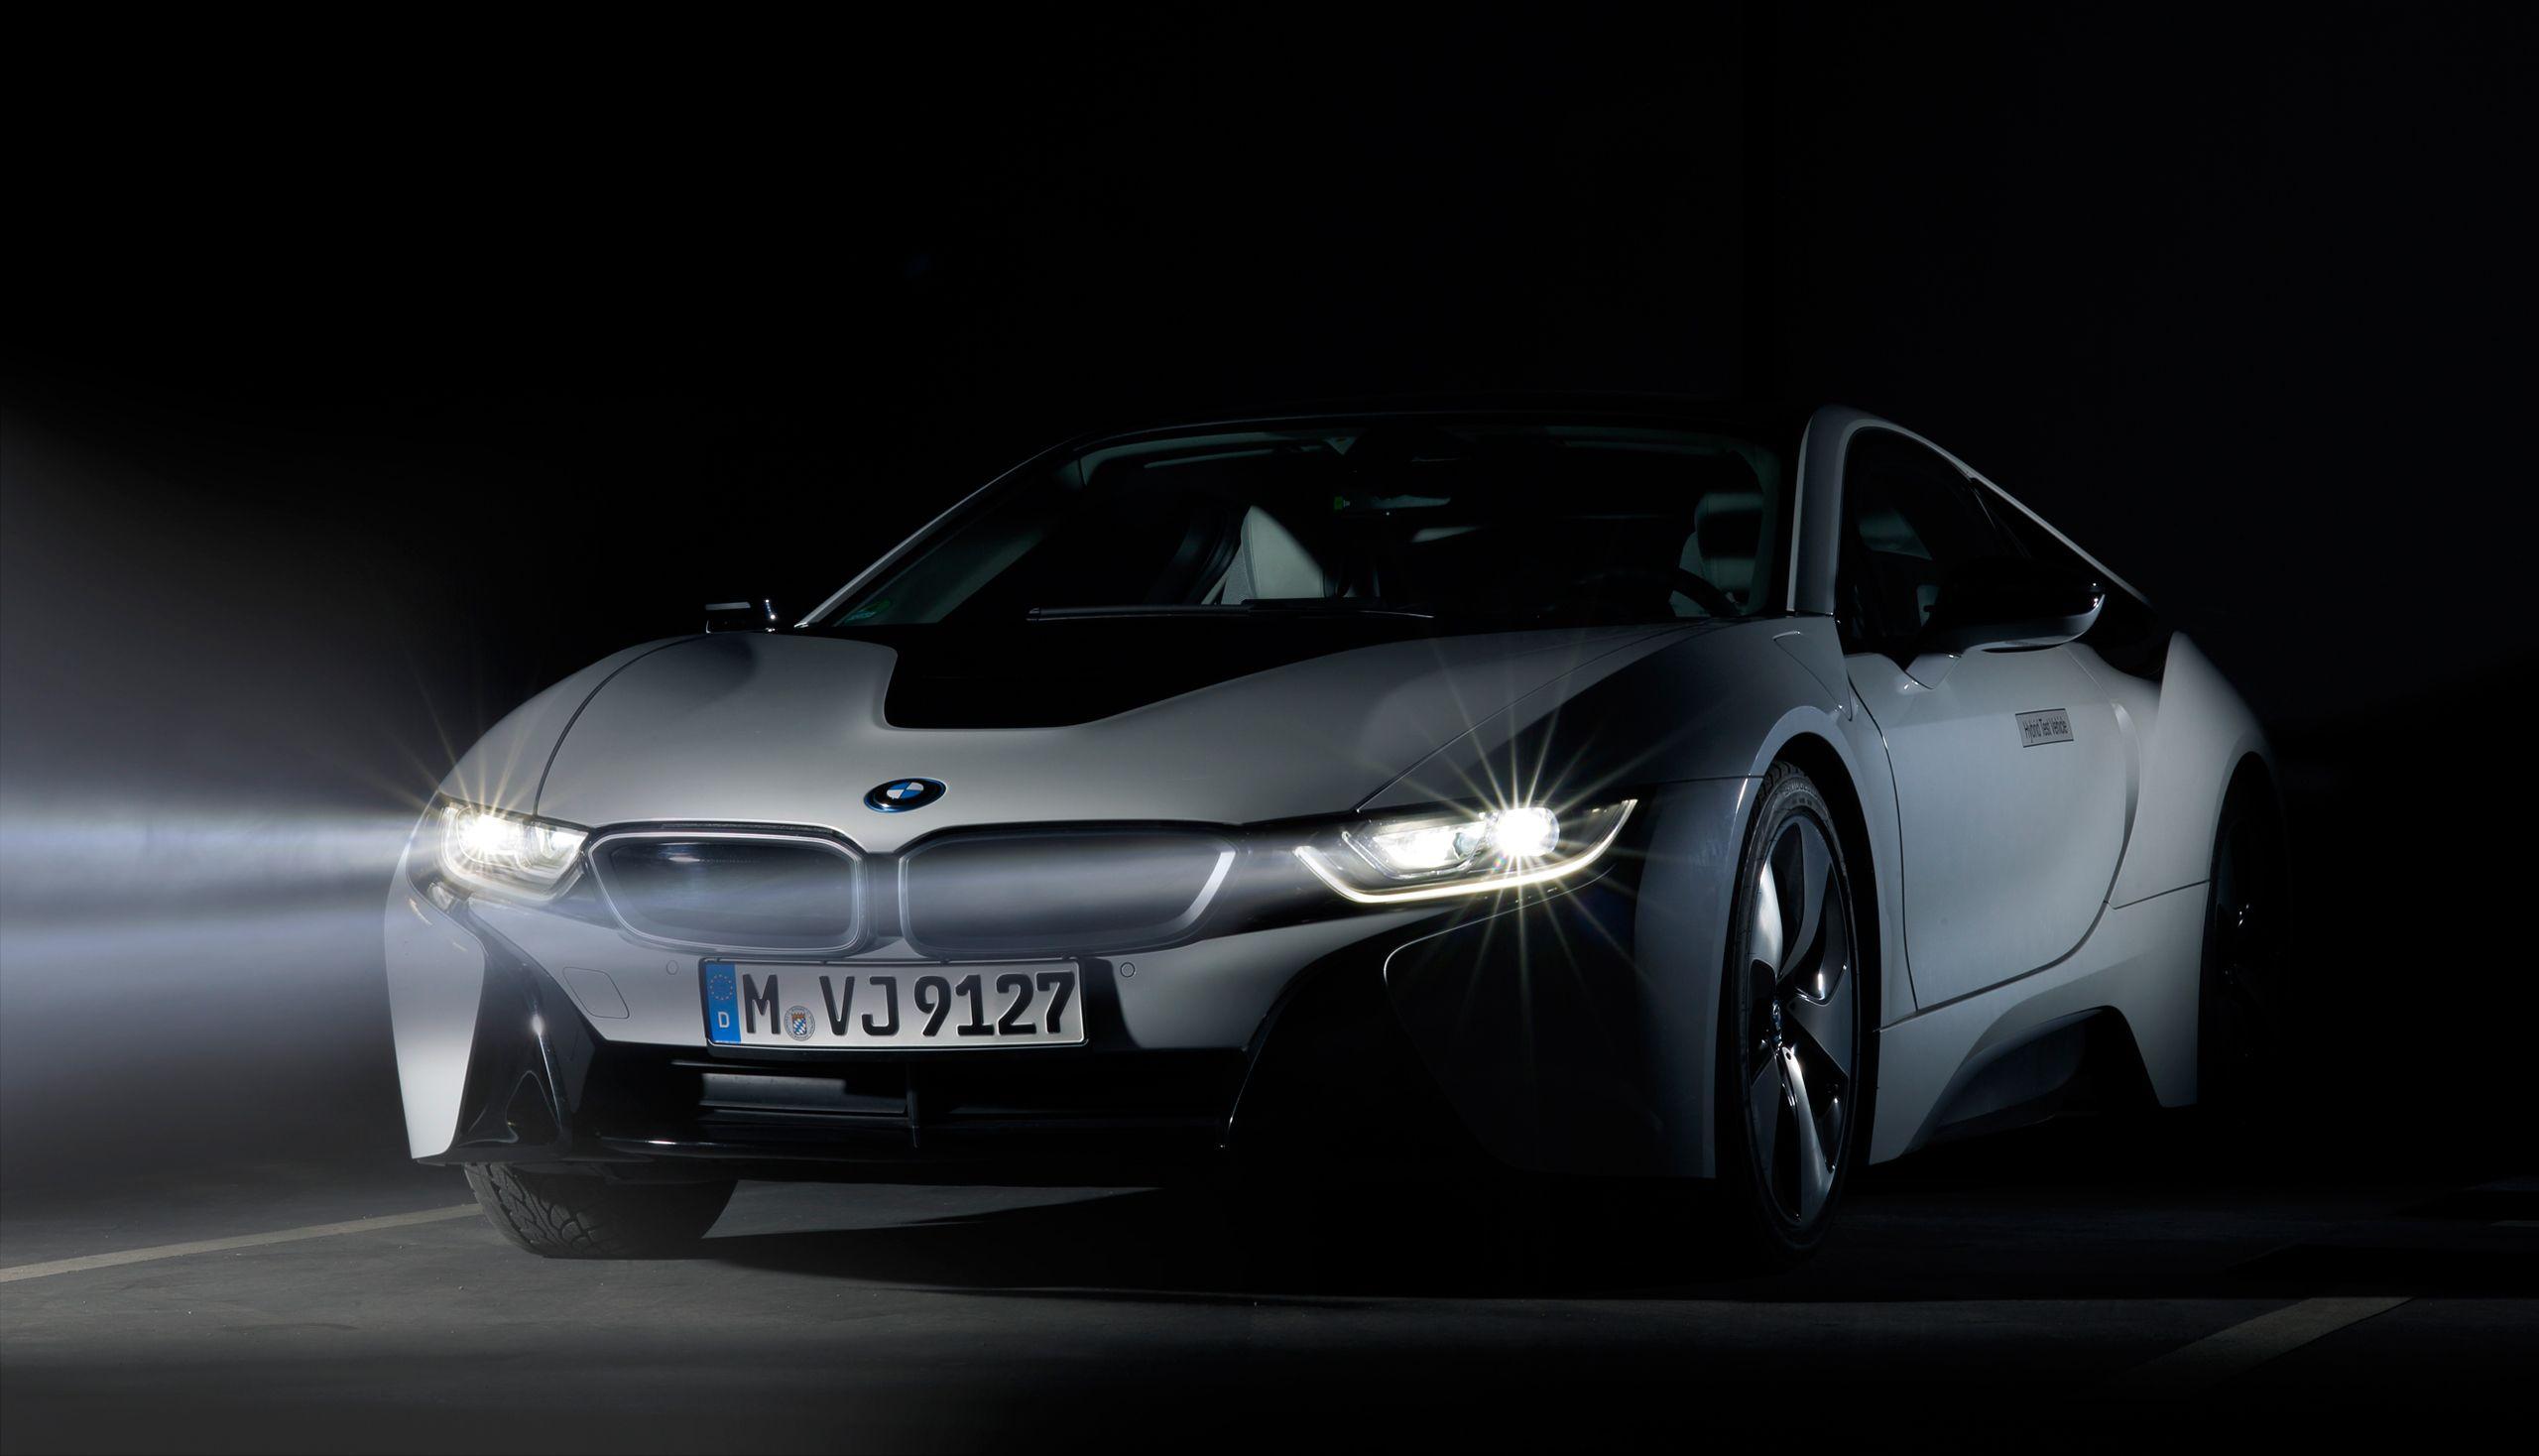 Black Bmw I8 Wallpapers Top Free Black Bmw I8 Backgrounds Wallpaperaccess